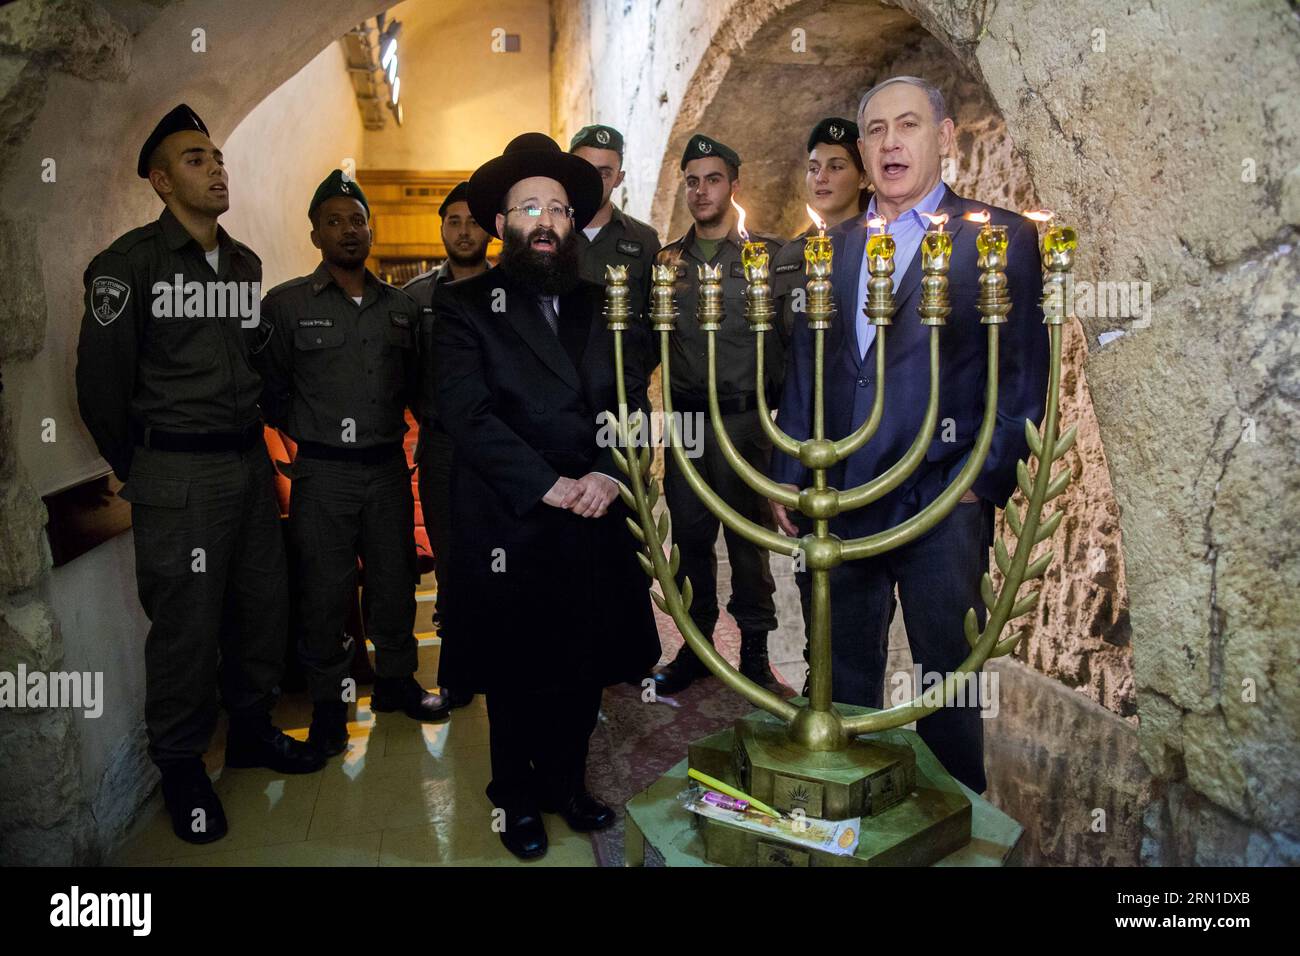 Israeli Prime Minister Benjamin Netanyahu (1st R)attends a ceremony to mark the fifth night of Hanukkah at the Western Wall in the Old City of Jerusalem, on Dec. 20, 2014. Hanukkah, also known as the Festival of Lights and Feast of Dedication, is an eight-day Jewish holiday commemorating the rededication of the Holy Temple (the Second Temple) in Jerusalem at the time of the Maccabean Revolt against the Seleucid Empire of the 2nd Century B.C. Hanukkah is observed for eight nights and days, starting on the 25th day of Kislev according to the Hebrew calendar, which may occur at any time from late Stock Photo